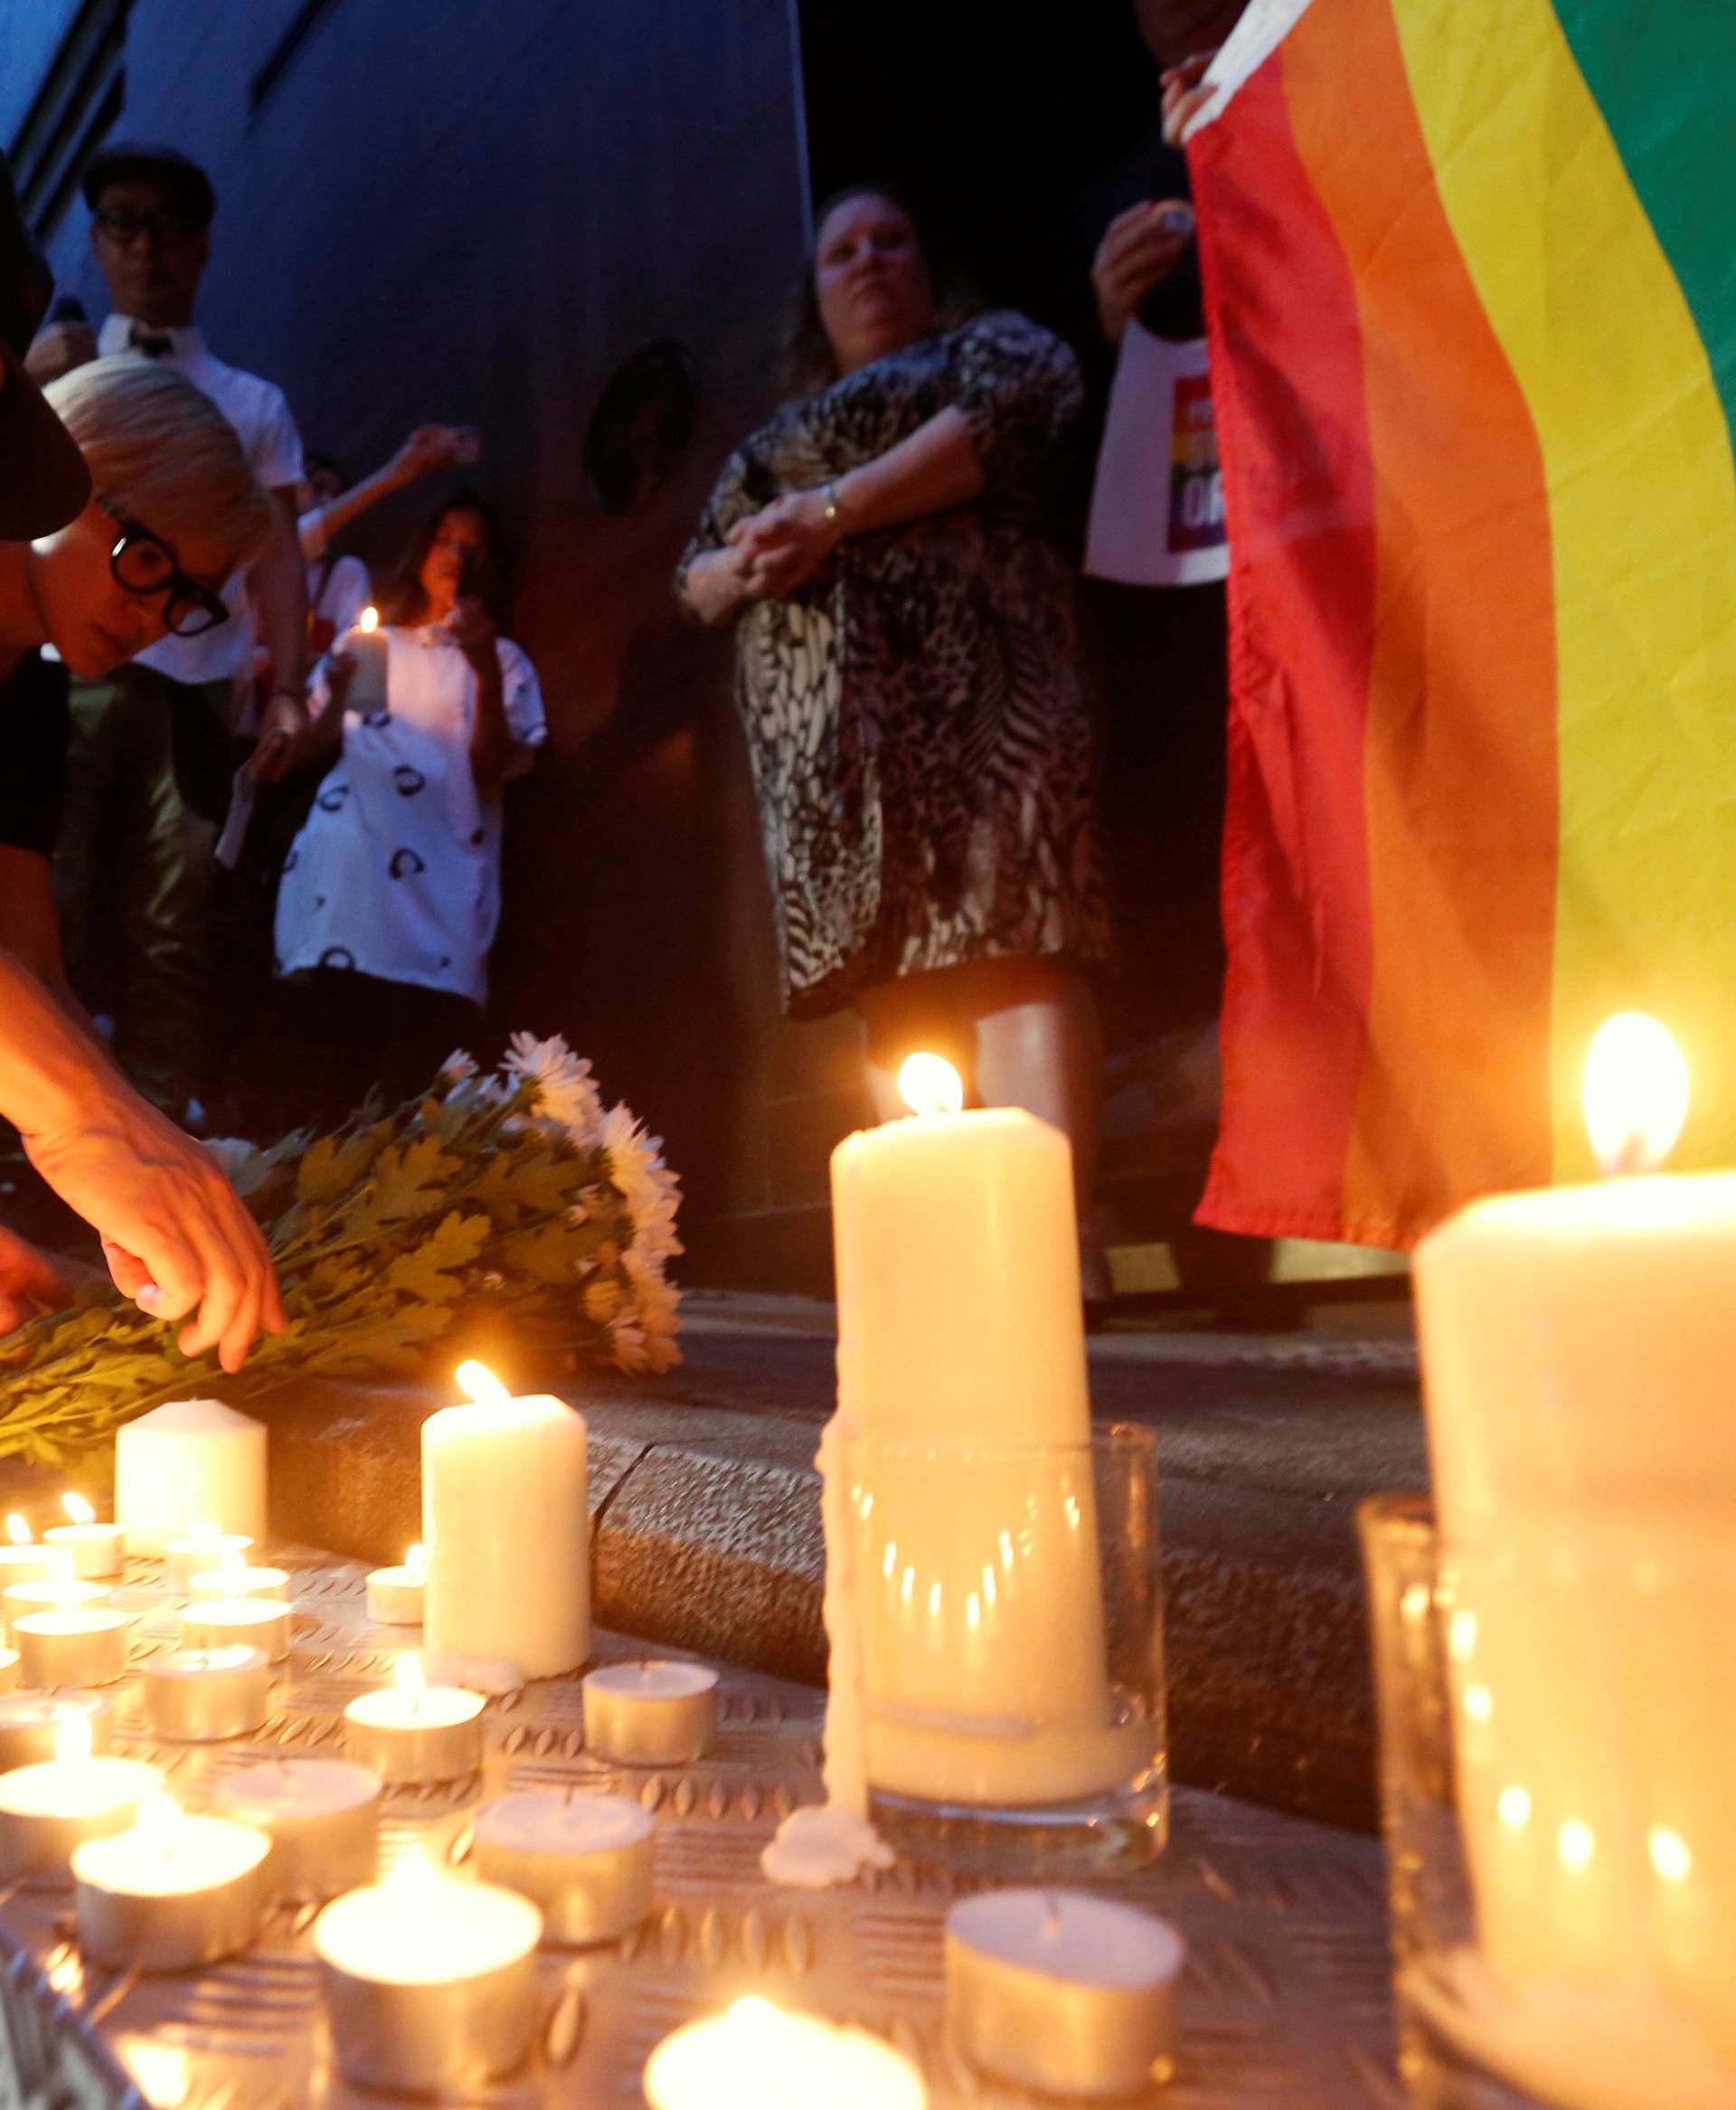 Hong Kong singers Anthony Wong and Denise Ho lay flowers during a candlelight vigil to mourn victims of the shooting at a gay nightclub in Orlando, in Hong Kong